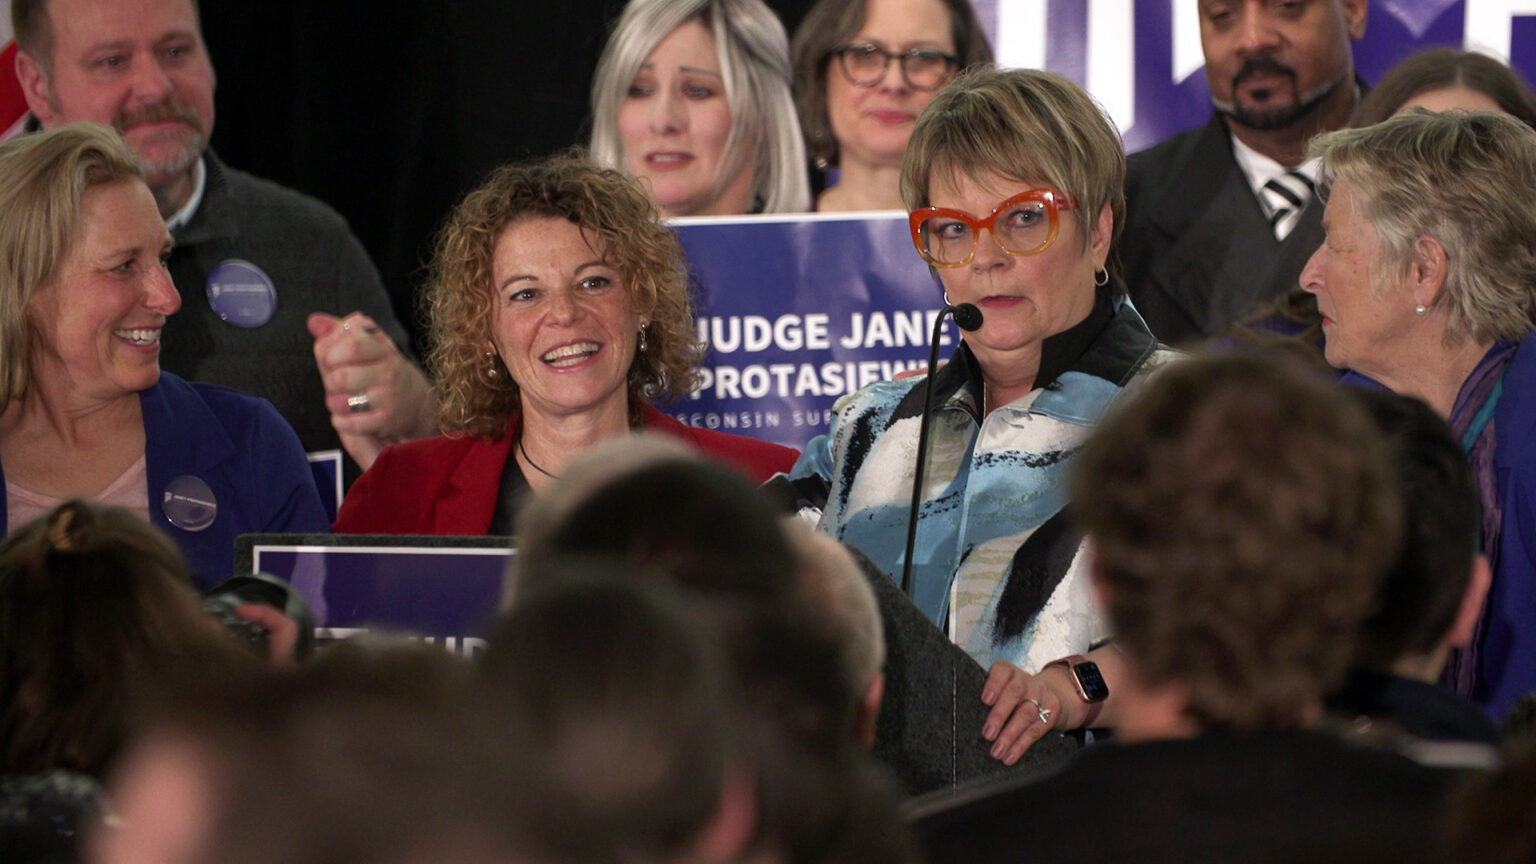 Janet Protasiewicz speaks into a microphone affixed to a podium while Jill Karofsky, Rebecca Dallet and Ann Walsh Bradley stand on either side of her, surrounded by other people behind them and facing them.